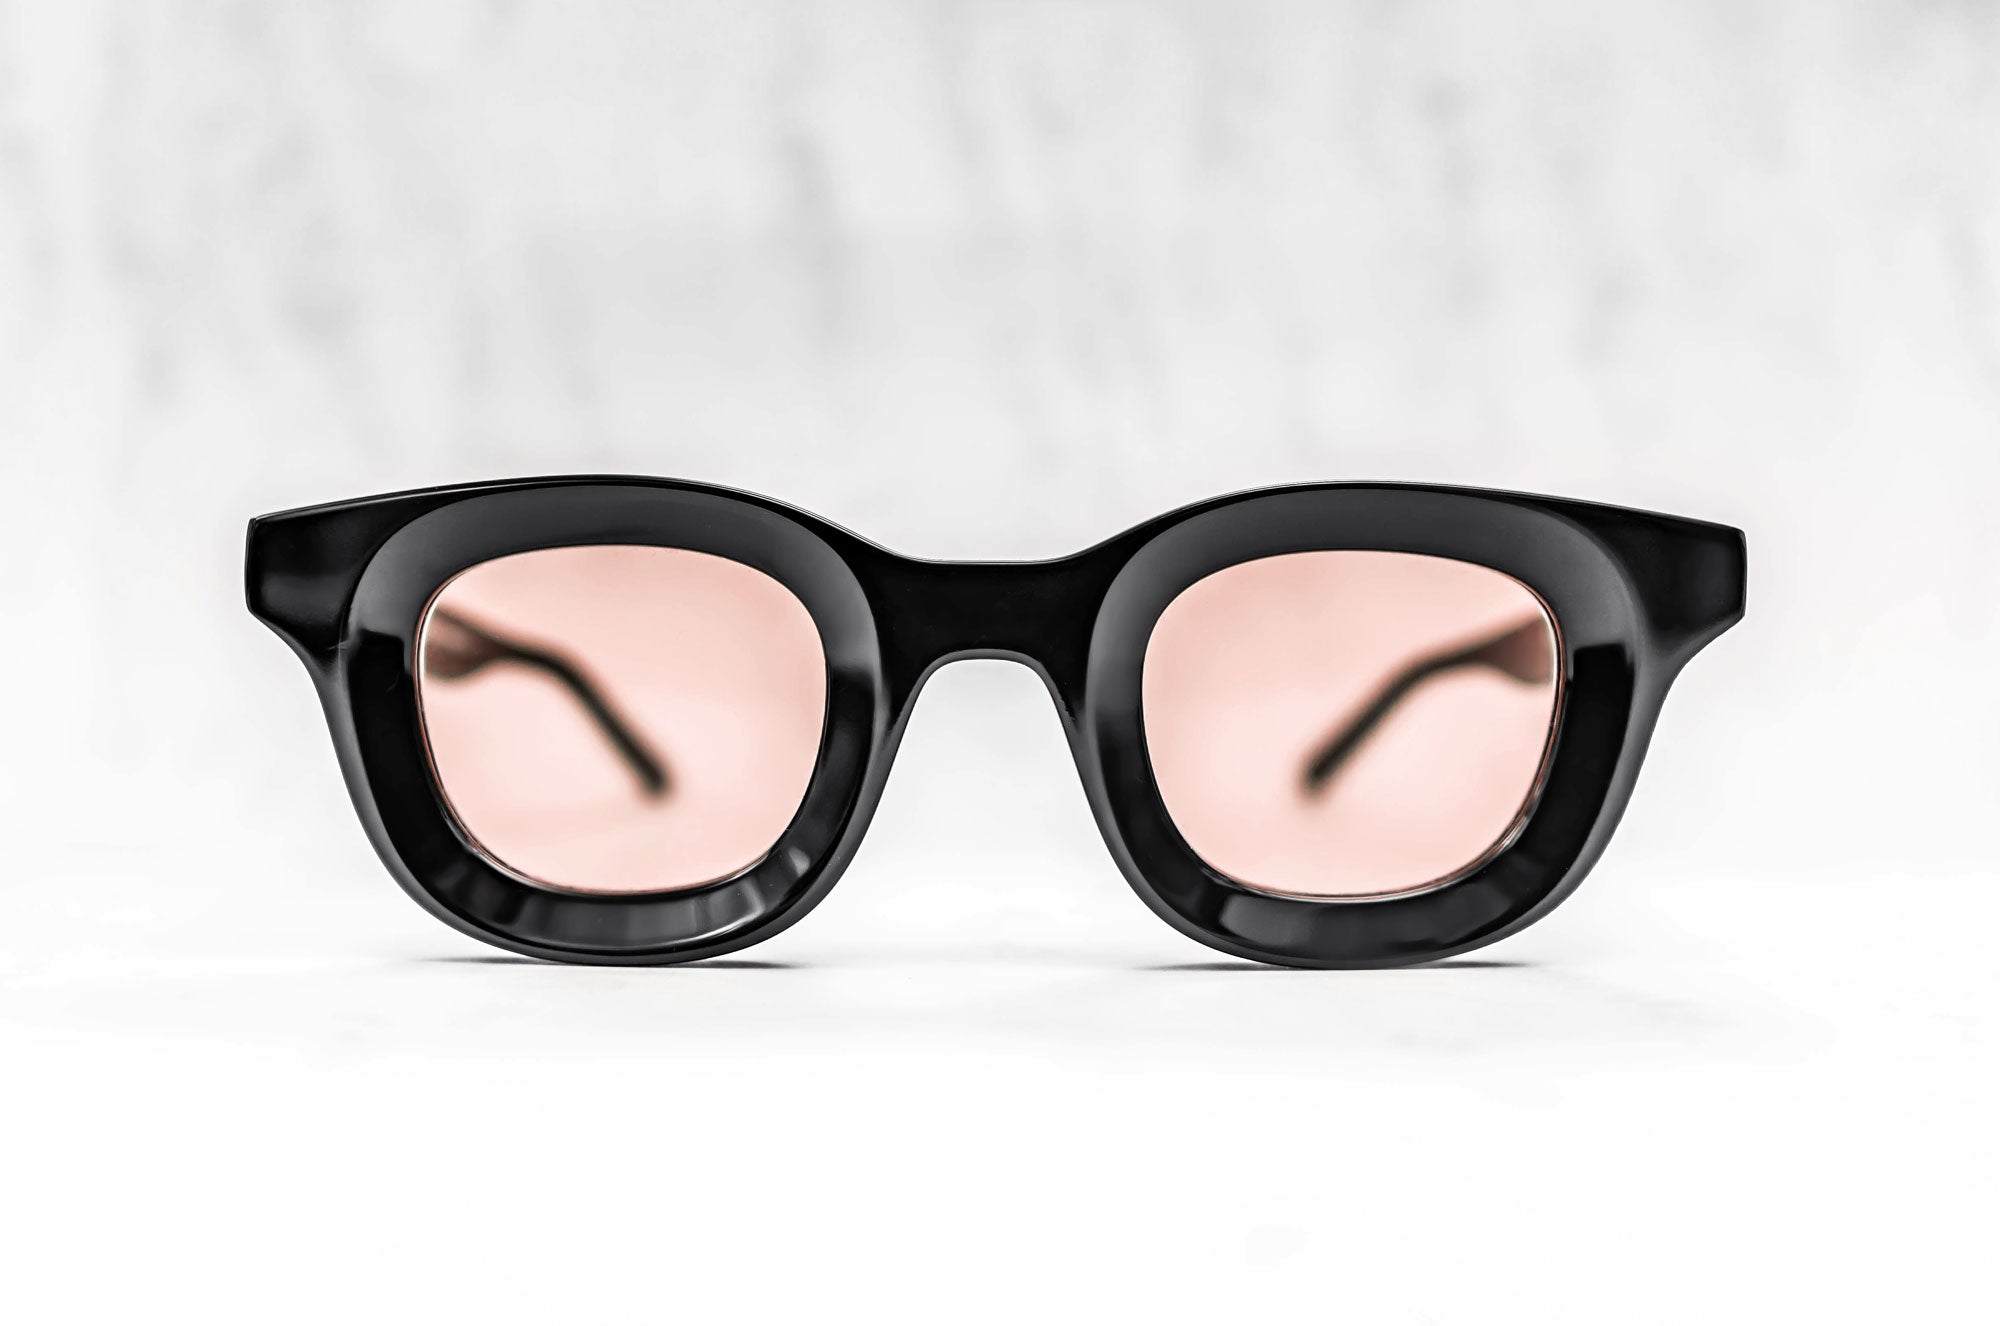 RHUDE x Thierry Lasry - Rhodeo Sunglasses in Black w/ Pink Lenses (101)